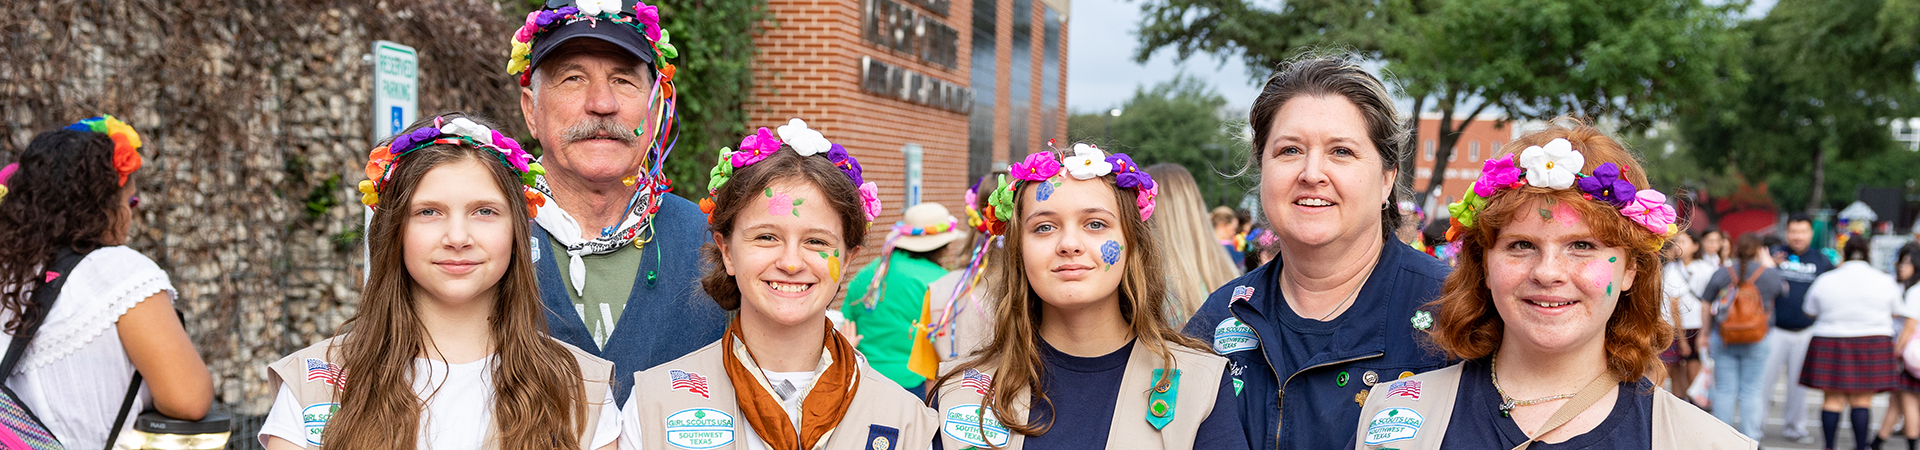  Girl Scout volunteers with a group of Girl Scouts smiling outdoors 